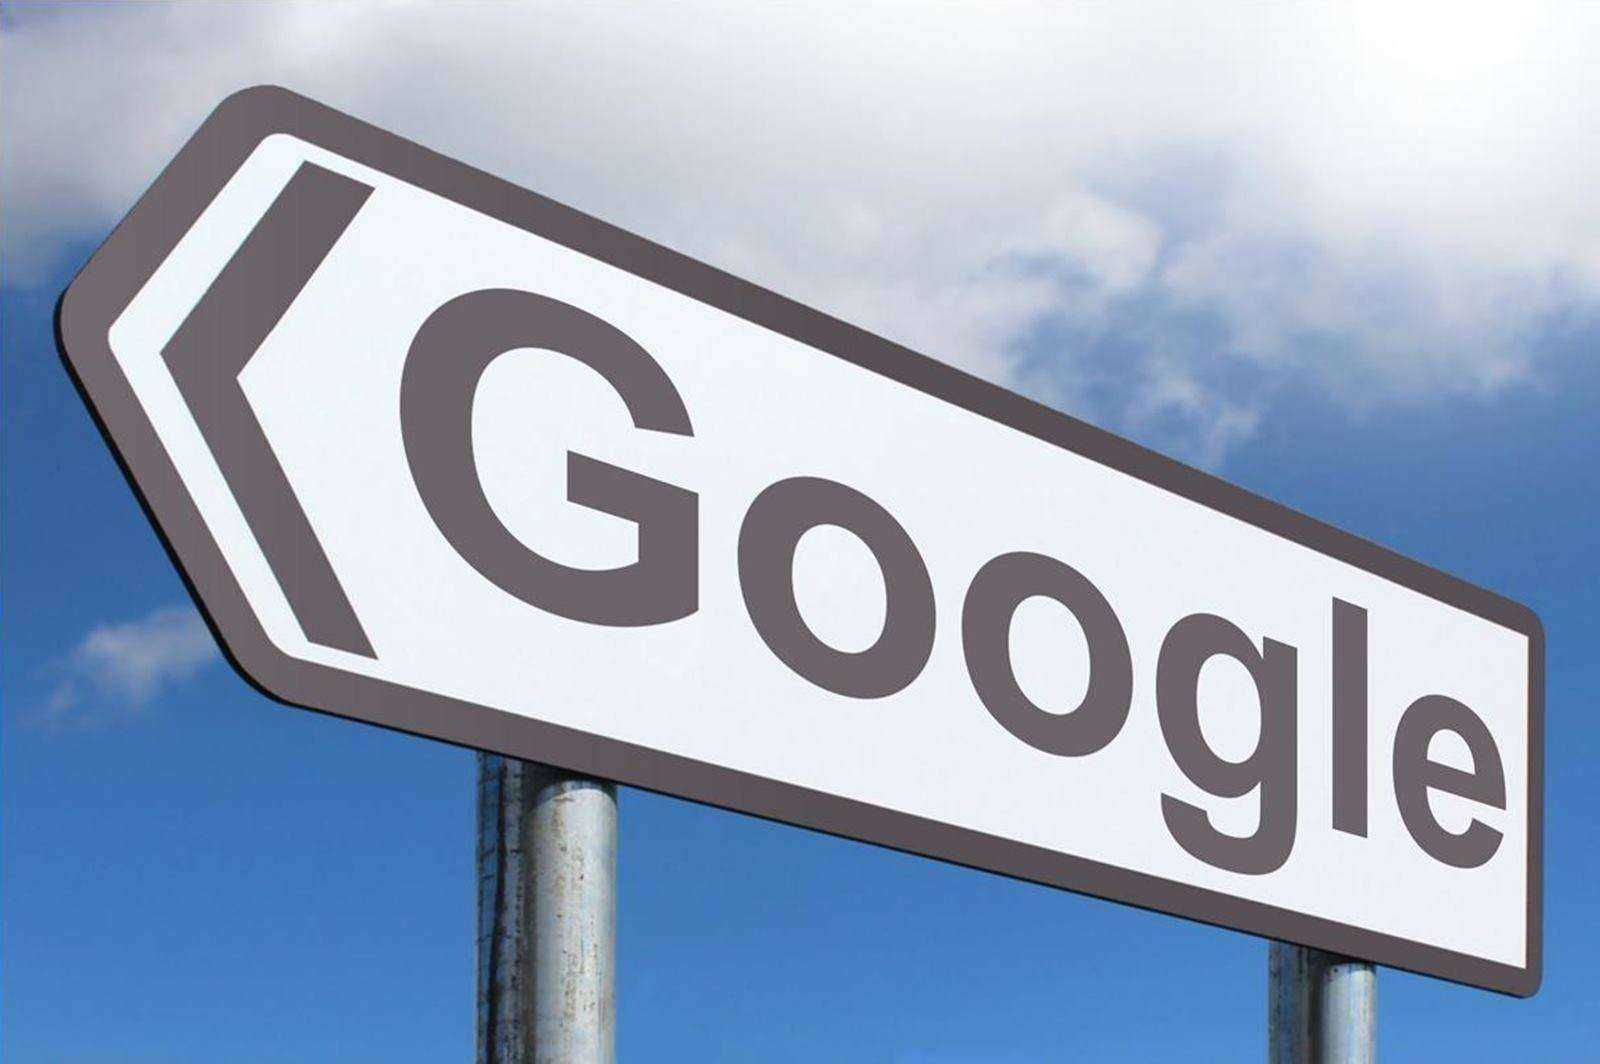 Get The Most Out of Google with Search Commands